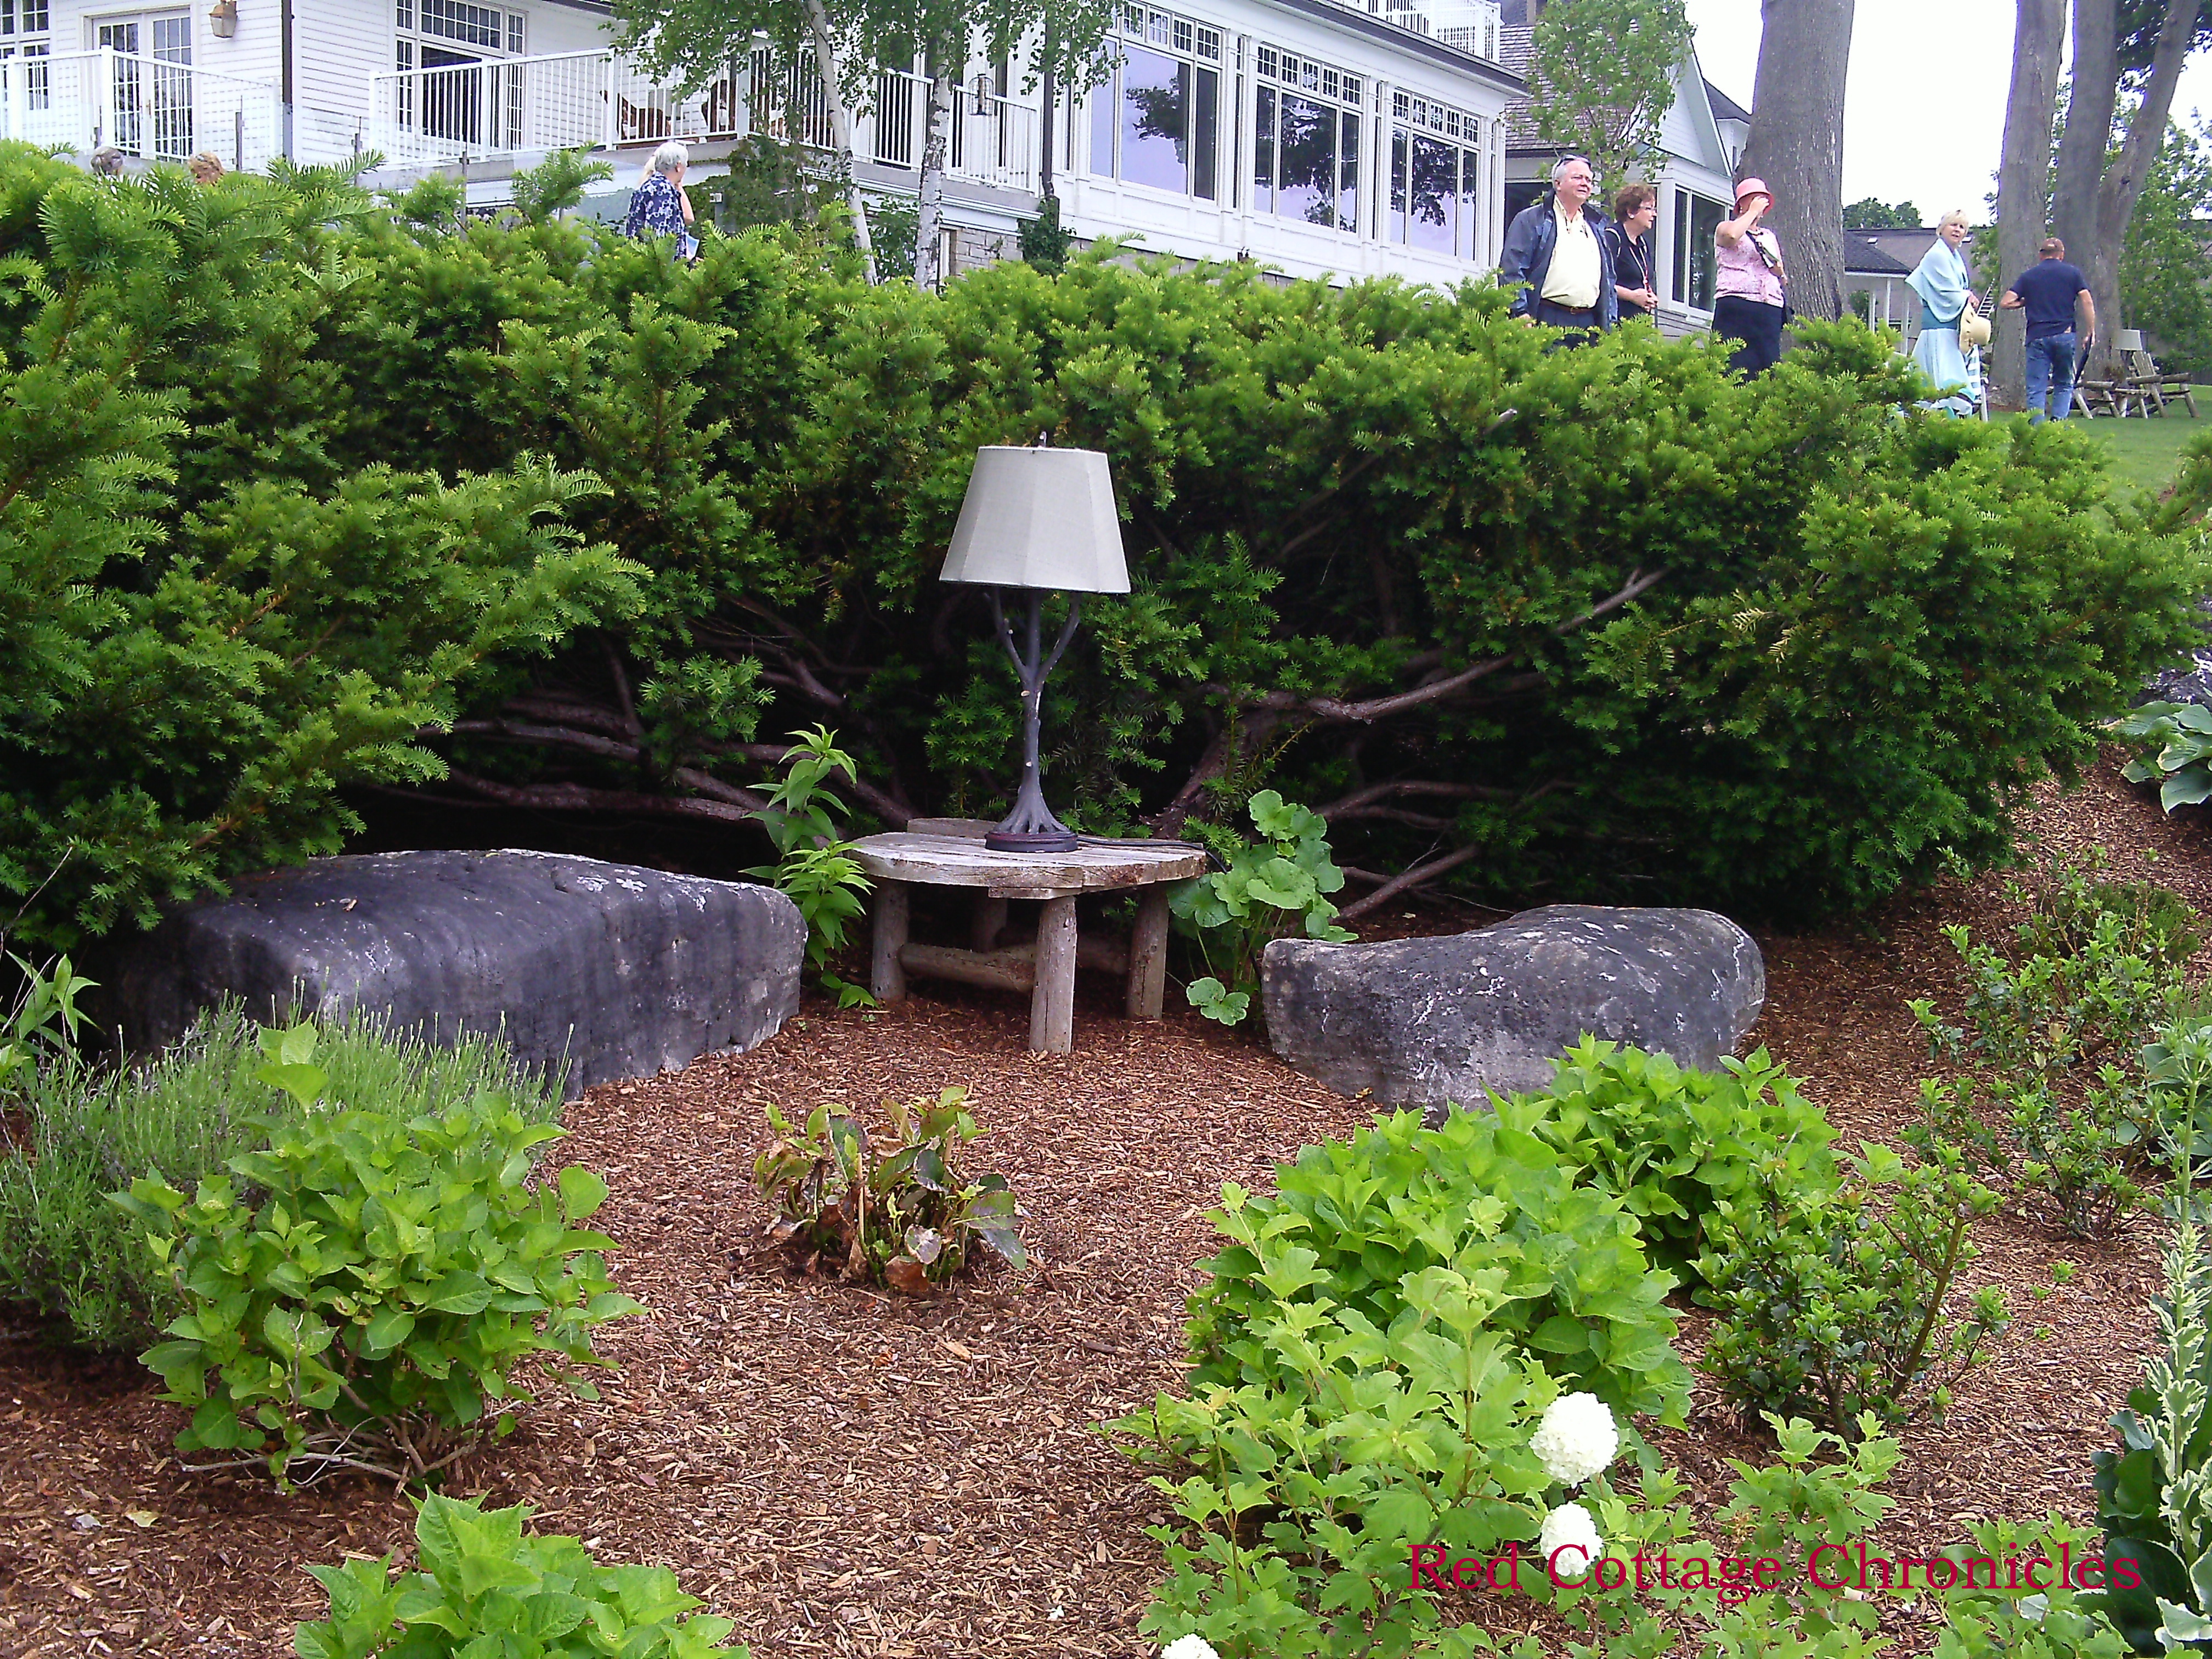 outdoor twig lamp and stone seats in a garden near lake Ontario